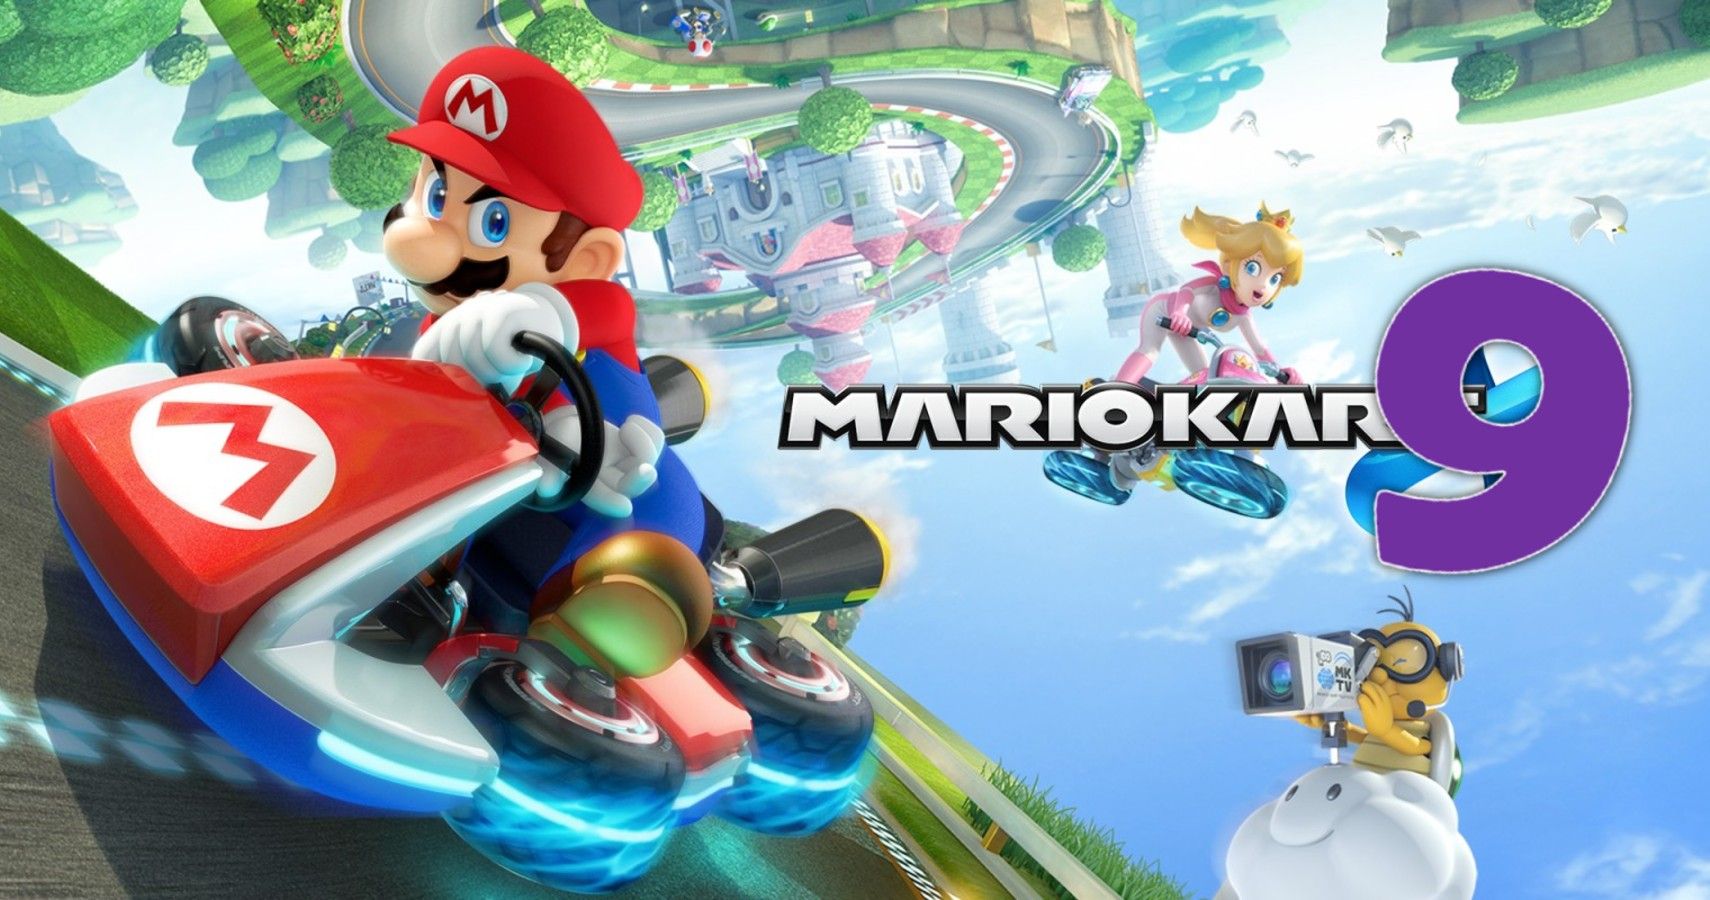 A New Mainline Mario Kart Game Will Be Here By 2022 According To Insider